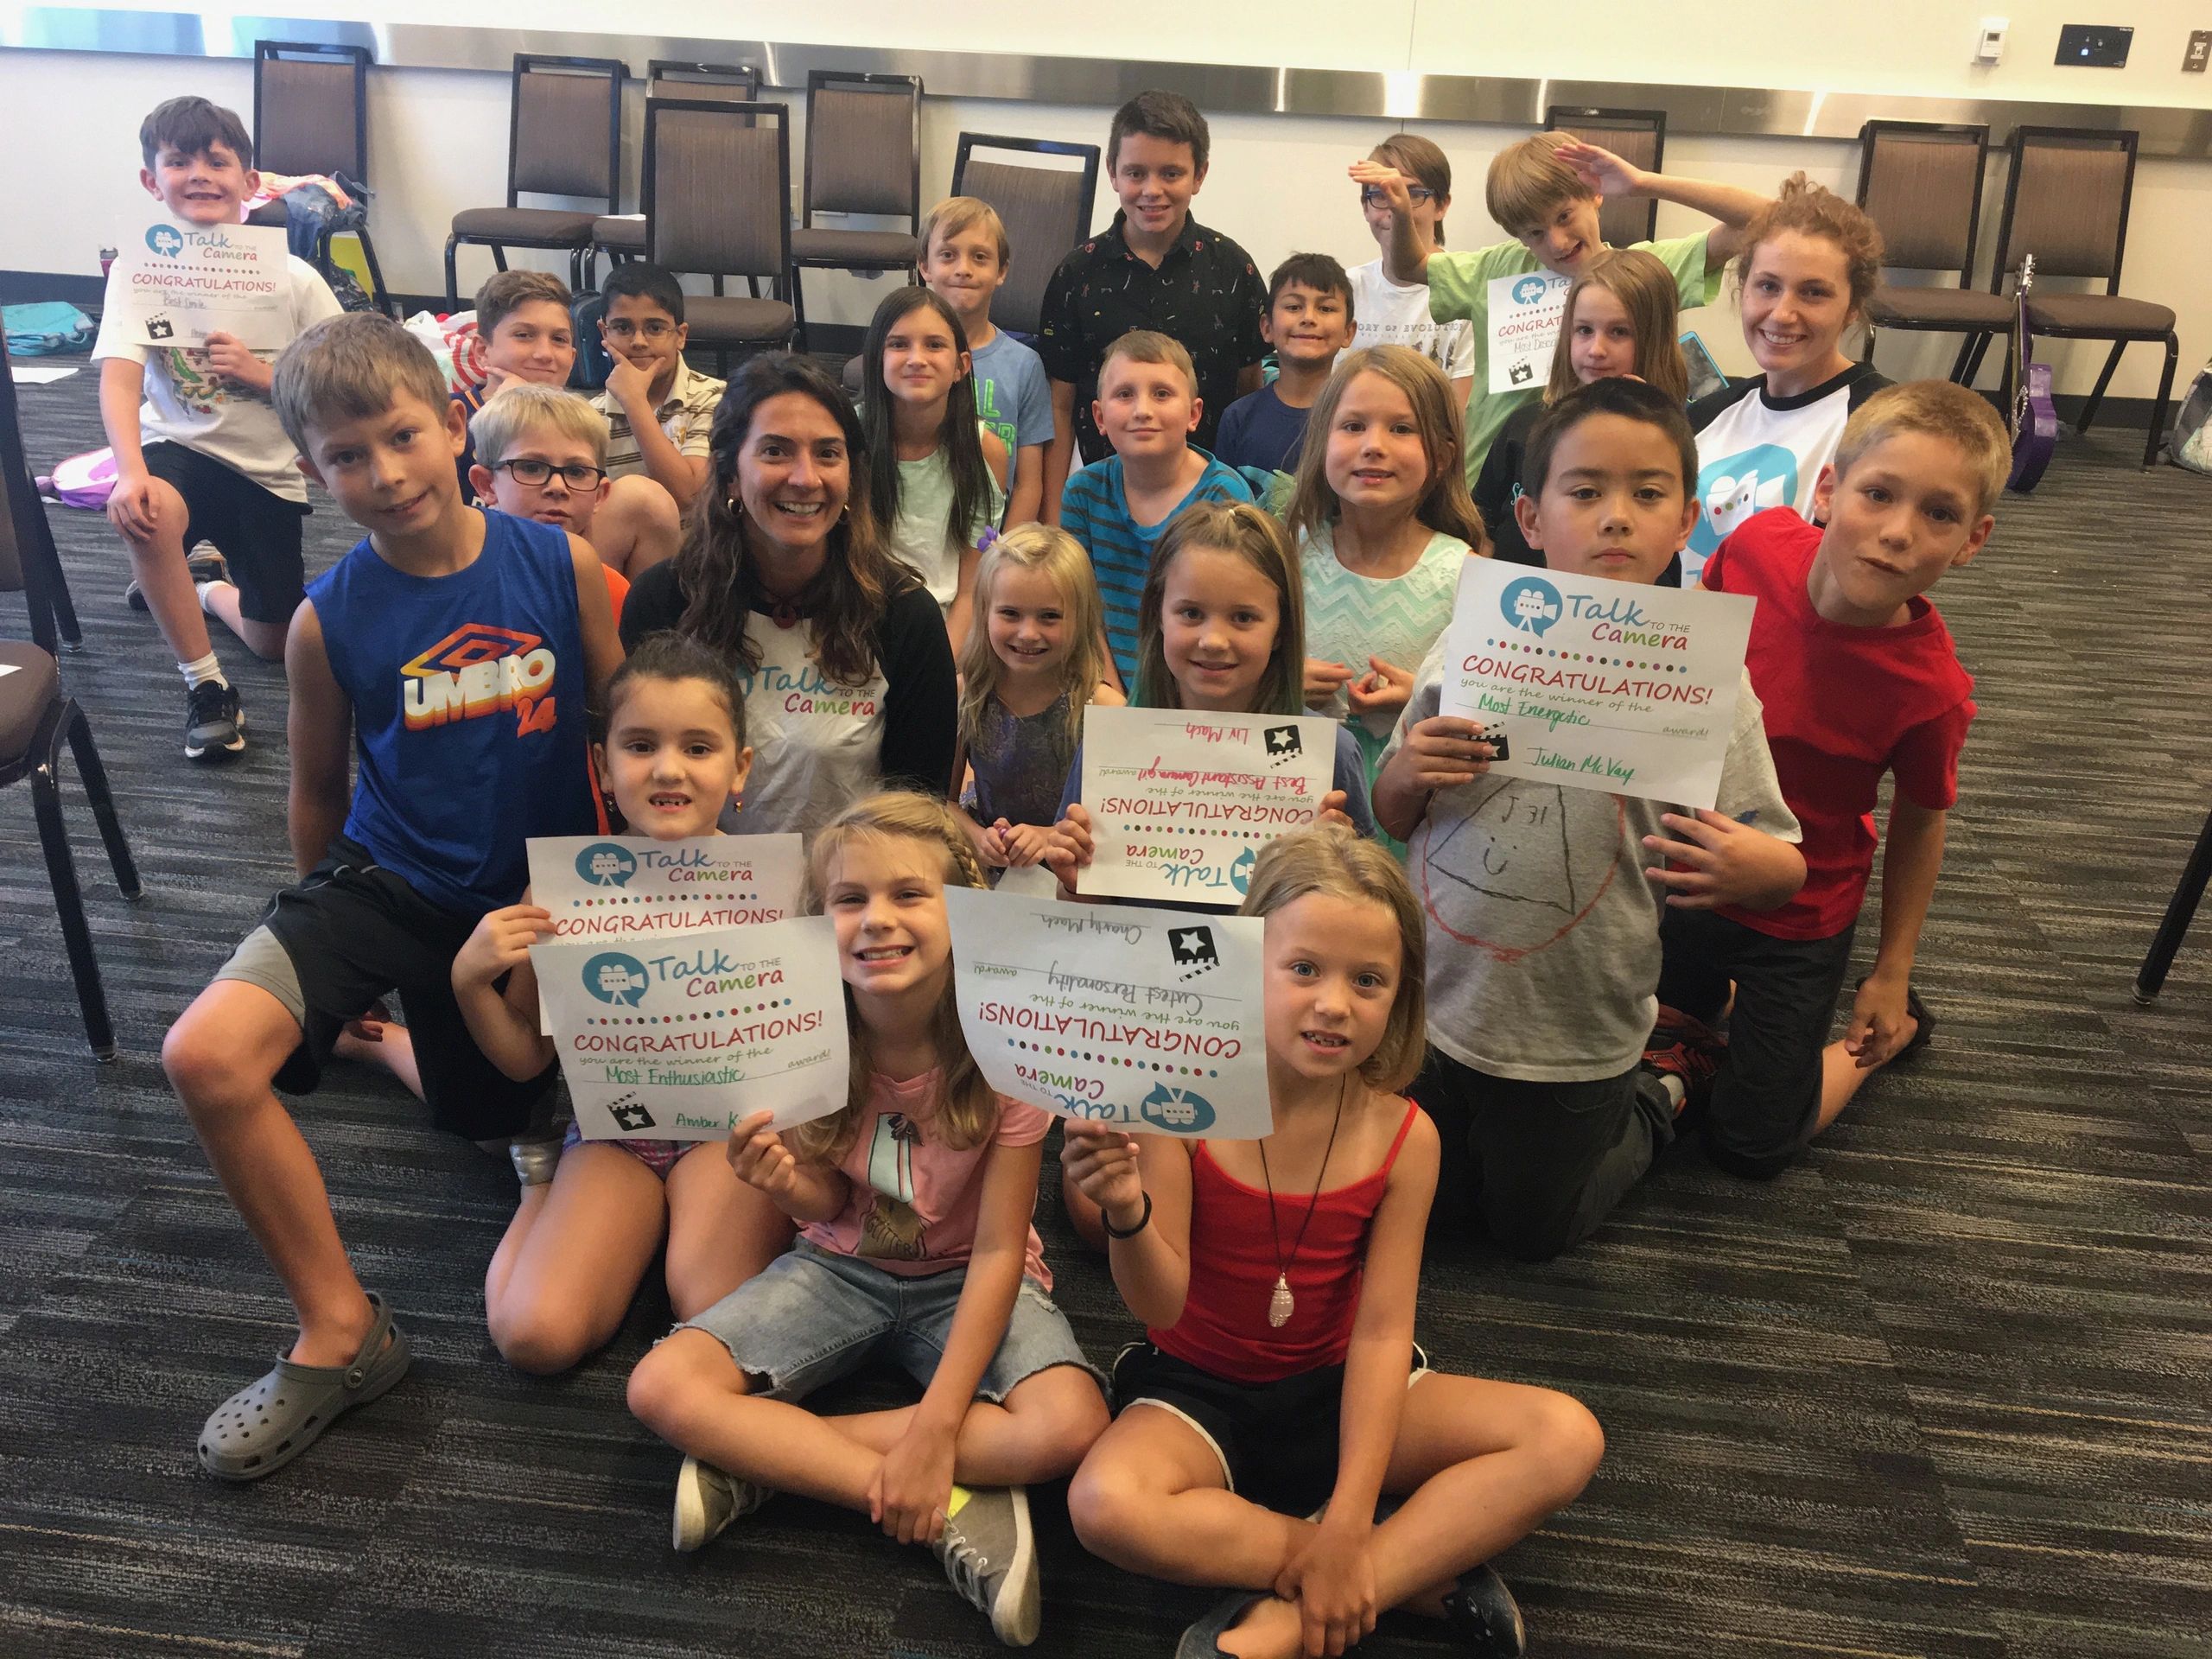 Students and teachers sitting in a classroom floor, smiling and holding up their class certificates